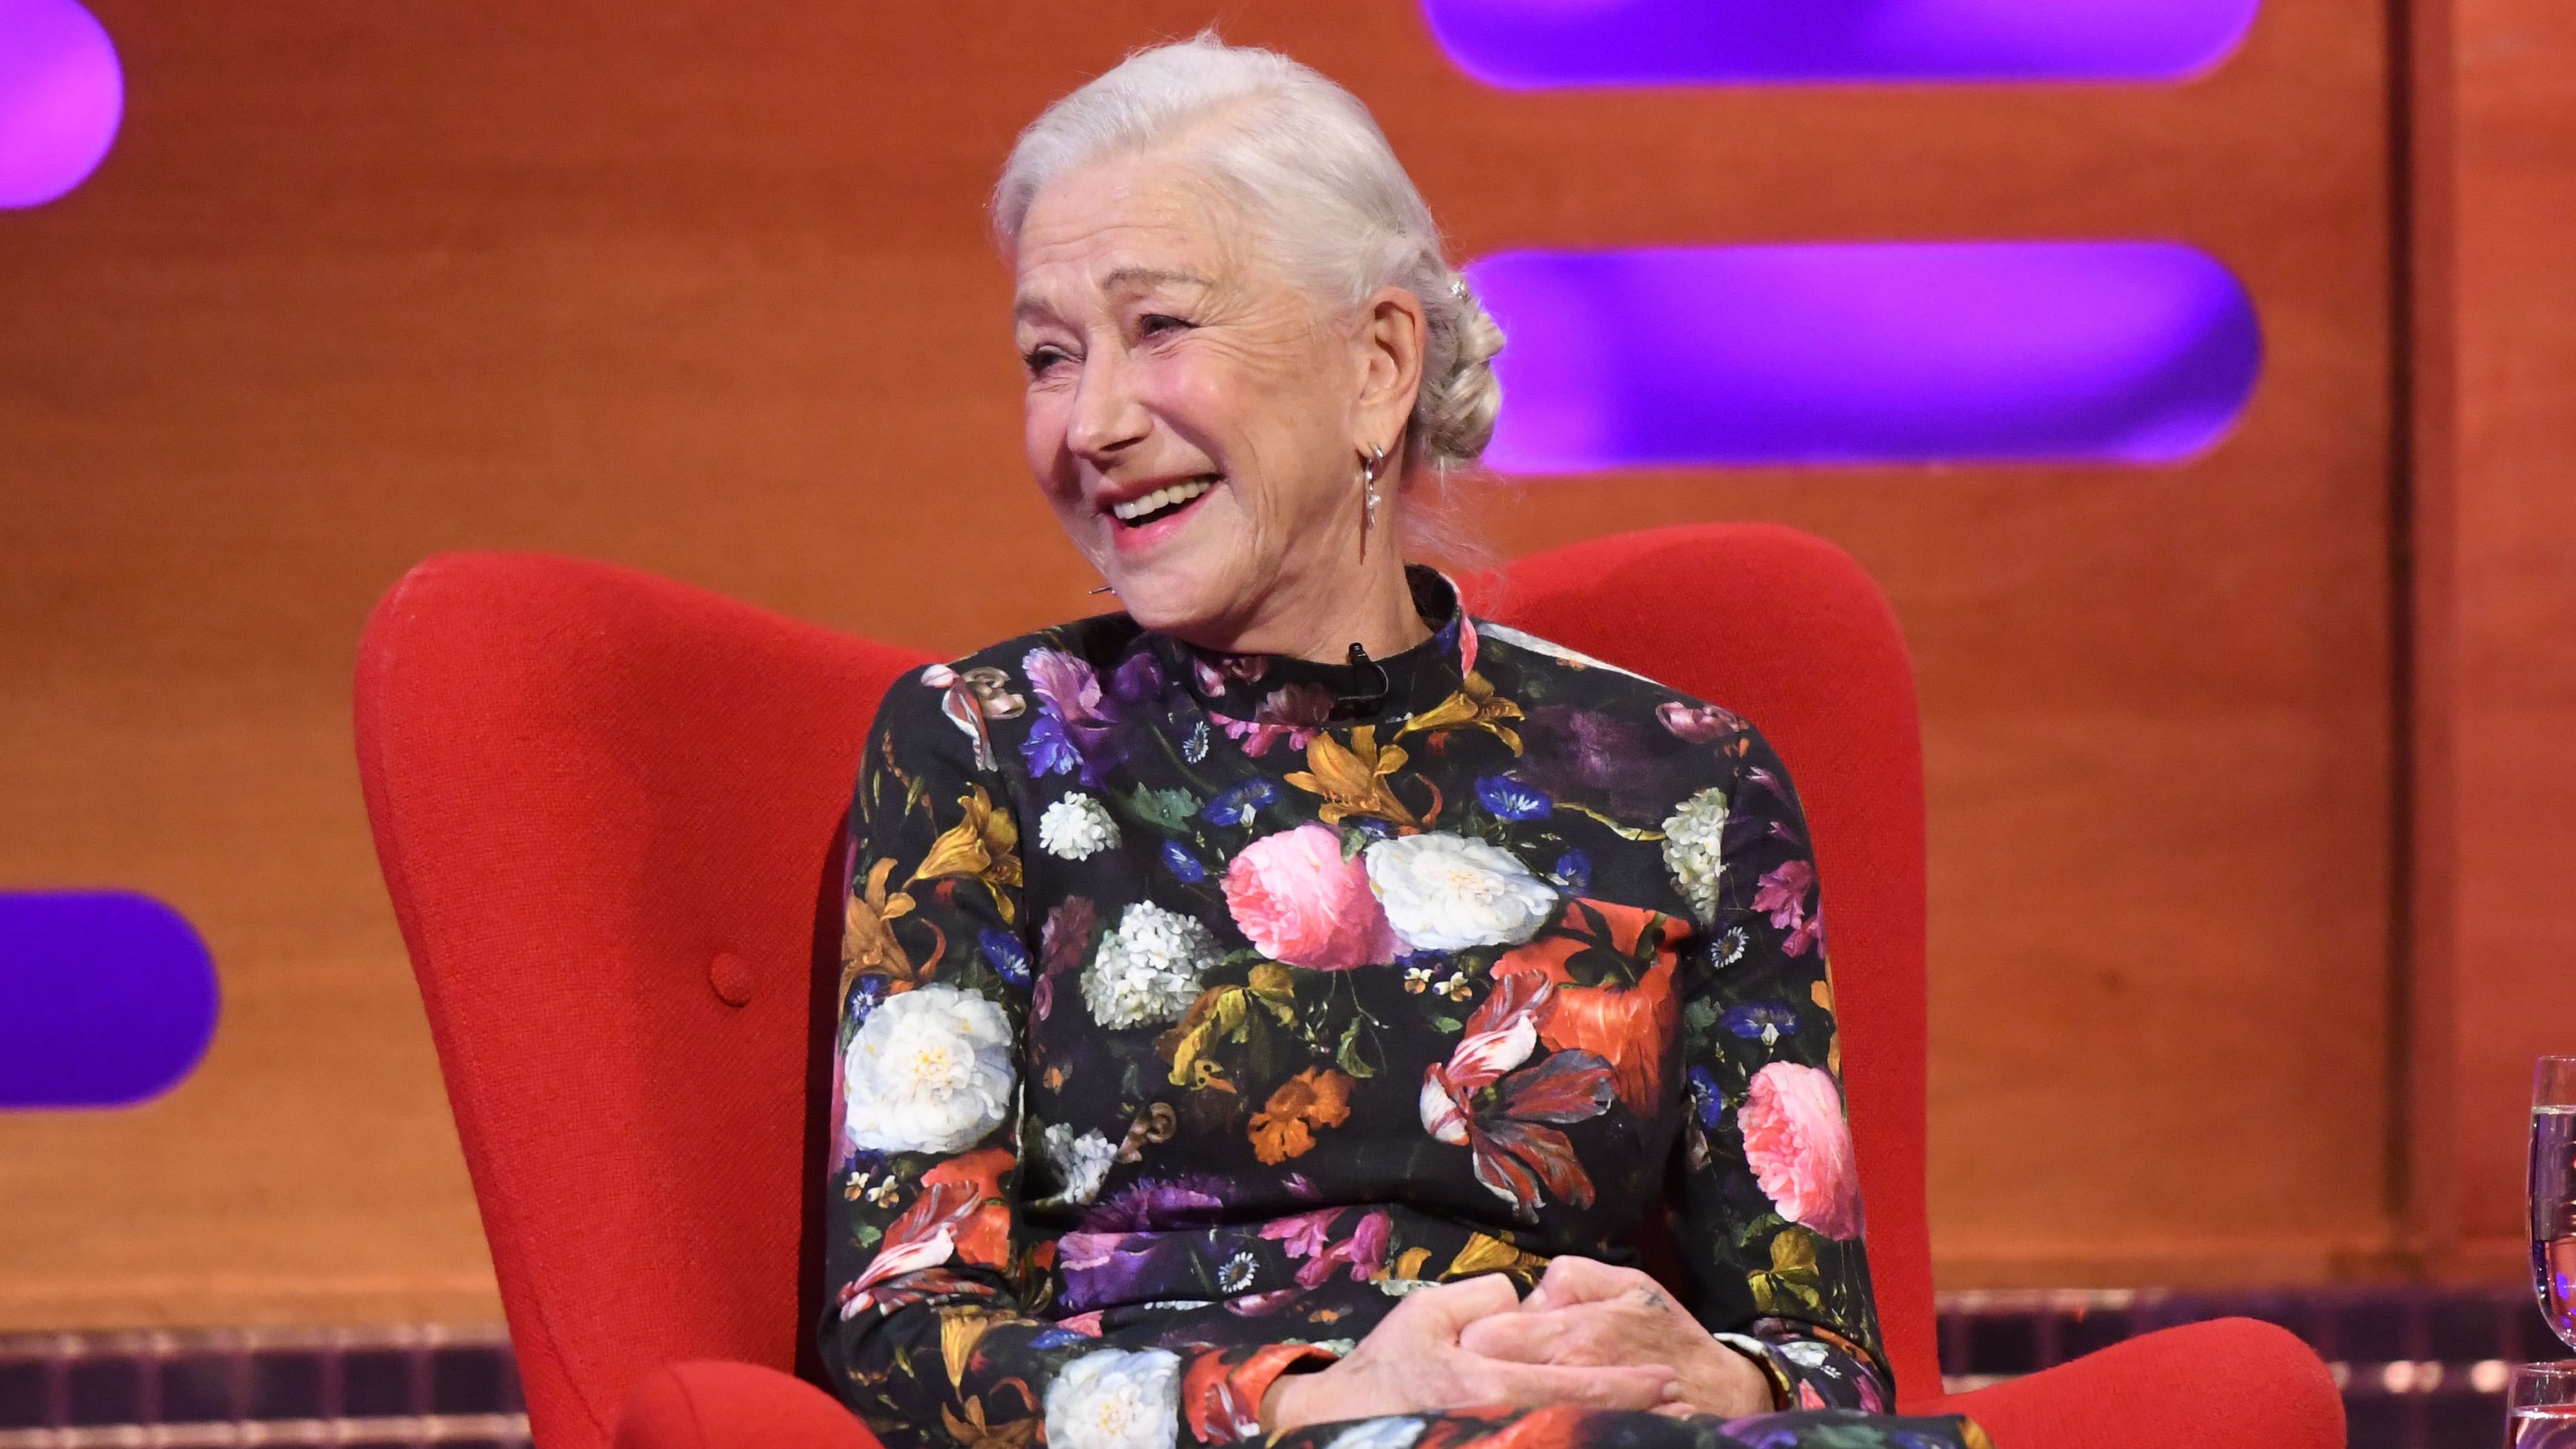 Speaking about her new film, The Duke, Dame Helen Mirren said the BBC is such an ‘such an amazing thing’.